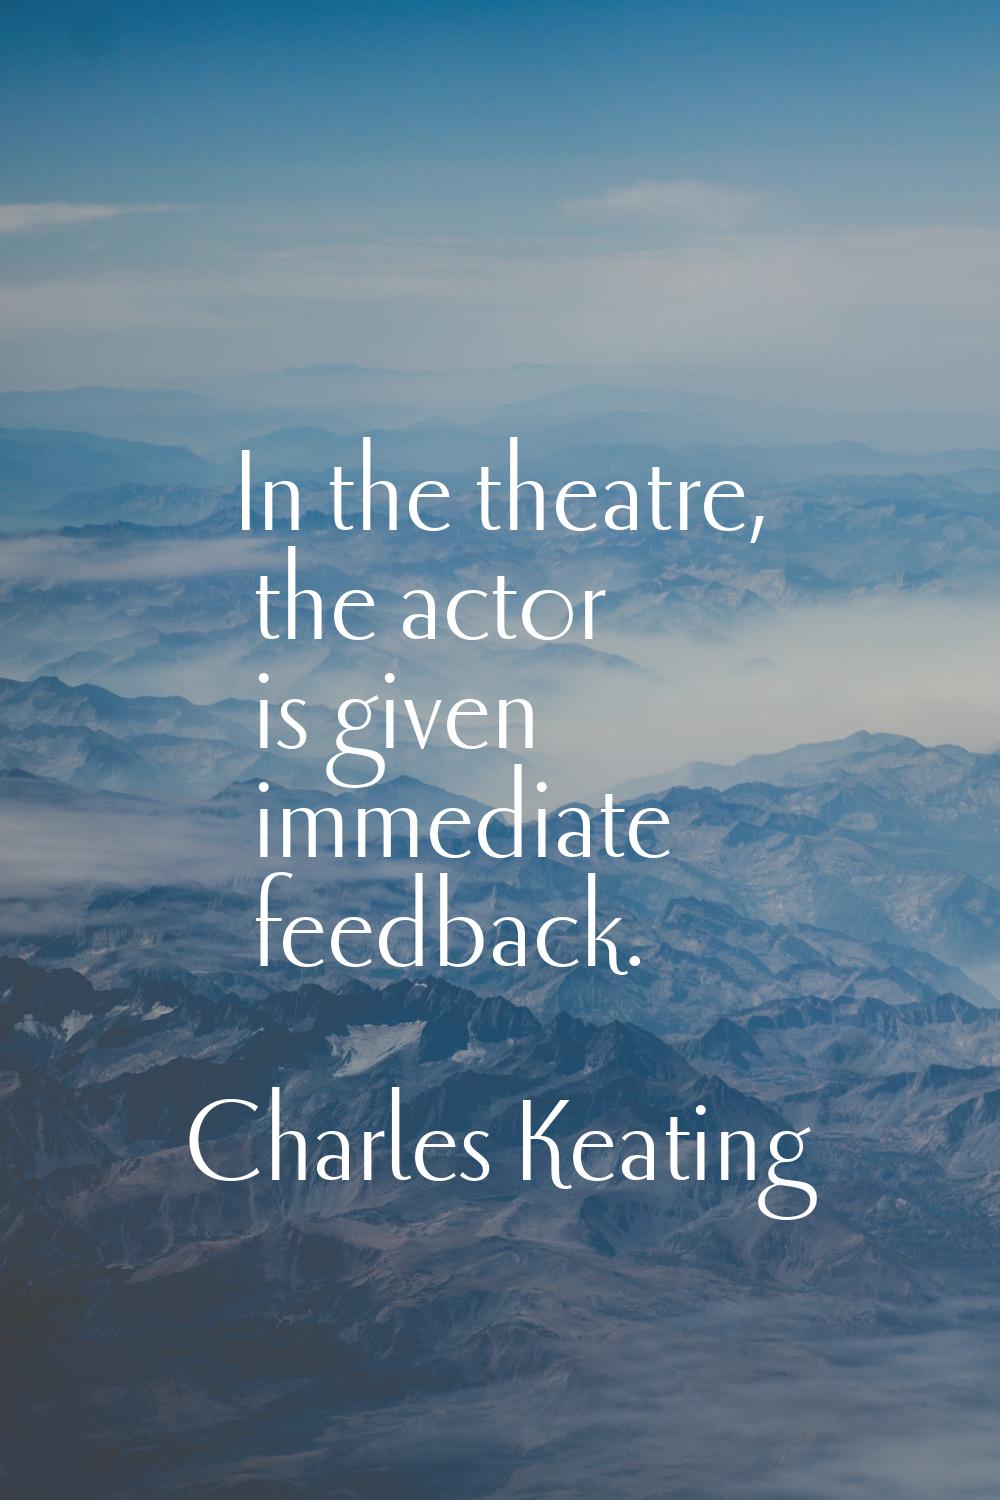 In the theatre, the actor is given immediate feedback.